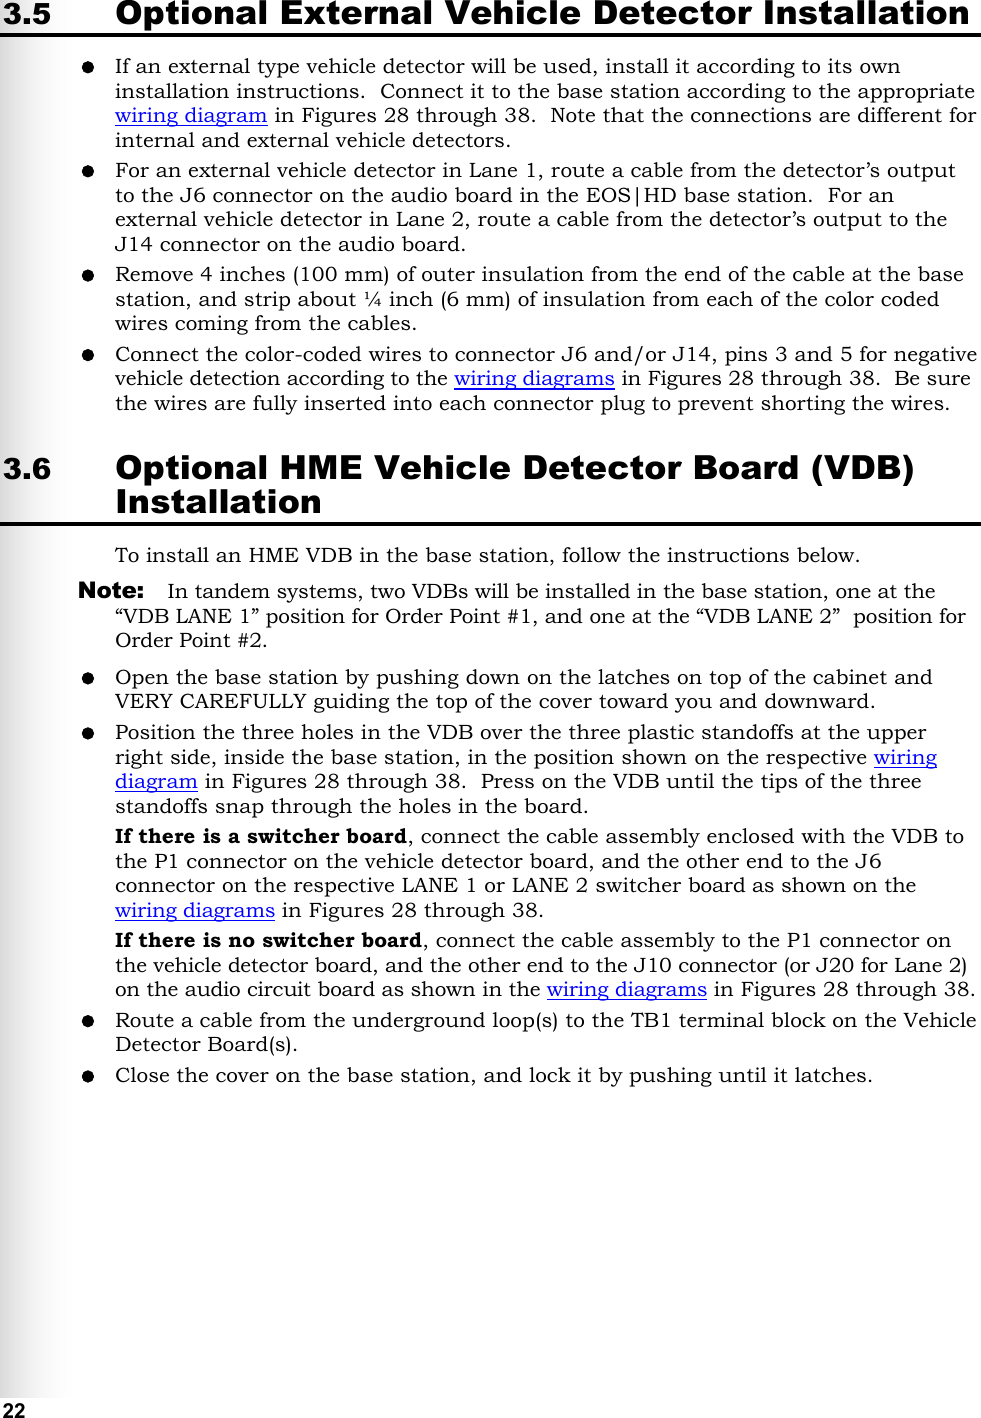   22 3.5 Optional External Vehicle Detector Installation  If an external type vehicle detector will be used, install it according to its own installation instructions.  Connect it to the base station according to the appropriate wiring diagram in Figures 28 through 38.  Note that the connections are different for internal and external vehicle detectors.  For an external vehicle detector in Lane 1, route a cable from the detector’s output to the J6 connector on the audio board in the EOS|HD base station.  For an external vehicle detector in Lane 2, route a cable from the detector’s output to the J14 connector on the audio board.  Remove 4 inches (100 mm) of outer insulation from the end of the cable at the base station, and strip about ¼ inch (6 mm) of insulation from each of the color coded wires coming from the cables.  Connect the color-coded wires to connector J6 and/or J14, pins 3 and 5 for negative vehicle detection according to the wiring diagrams in Figures 28 through 38.  Be sure the wires are fully inserted into each connector plug to prevent shorting the wires. 3.6 Optional HME Vehicle Detector Board (VDB) Installation To install an HME VDB in the base station, follow the instructions below.  Note:  In tandem systems, two VDBs will be installed in the base station, one at the “VDB LANE 1” position for Order Point #1, and one at the “VDB LANE 2”  position for Order Point #2.  Open the base station by pushing down on the latches on top of the cabinet and VERY CAREFULLY guiding the top of the cover toward you and downward.  Position the three holes in the VDB over the three plastic standoffs at the upper right side, inside the base station, in the position shown on the respective wiring diagram in Figures 28 through 38.  Press on the VDB until the tips of the three standoffs snap through the holes in the board. If there is a switcher board, connect the cable assembly enclosed with the VDB to the P1 connector on the vehicle detector board, and the other end to the J6 connector on the respective LANE 1 or LANE 2 switcher board as shown on the wiring diagrams in Figures 28 through 38.    If there is no switcher board, connect the cable assembly to the P1 connector on the vehicle detector board, and the other end to the J10 connector (or J20 for Lane 2) on the audio circuit board as shown in the wiring diagrams in Figures 28 through 38.   Route a cable from the underground loop(s) to the TB1 terminal block on the Vehicle Detector Board(s).  Close the cover on the base station, and lock it by pushing until it latches.   